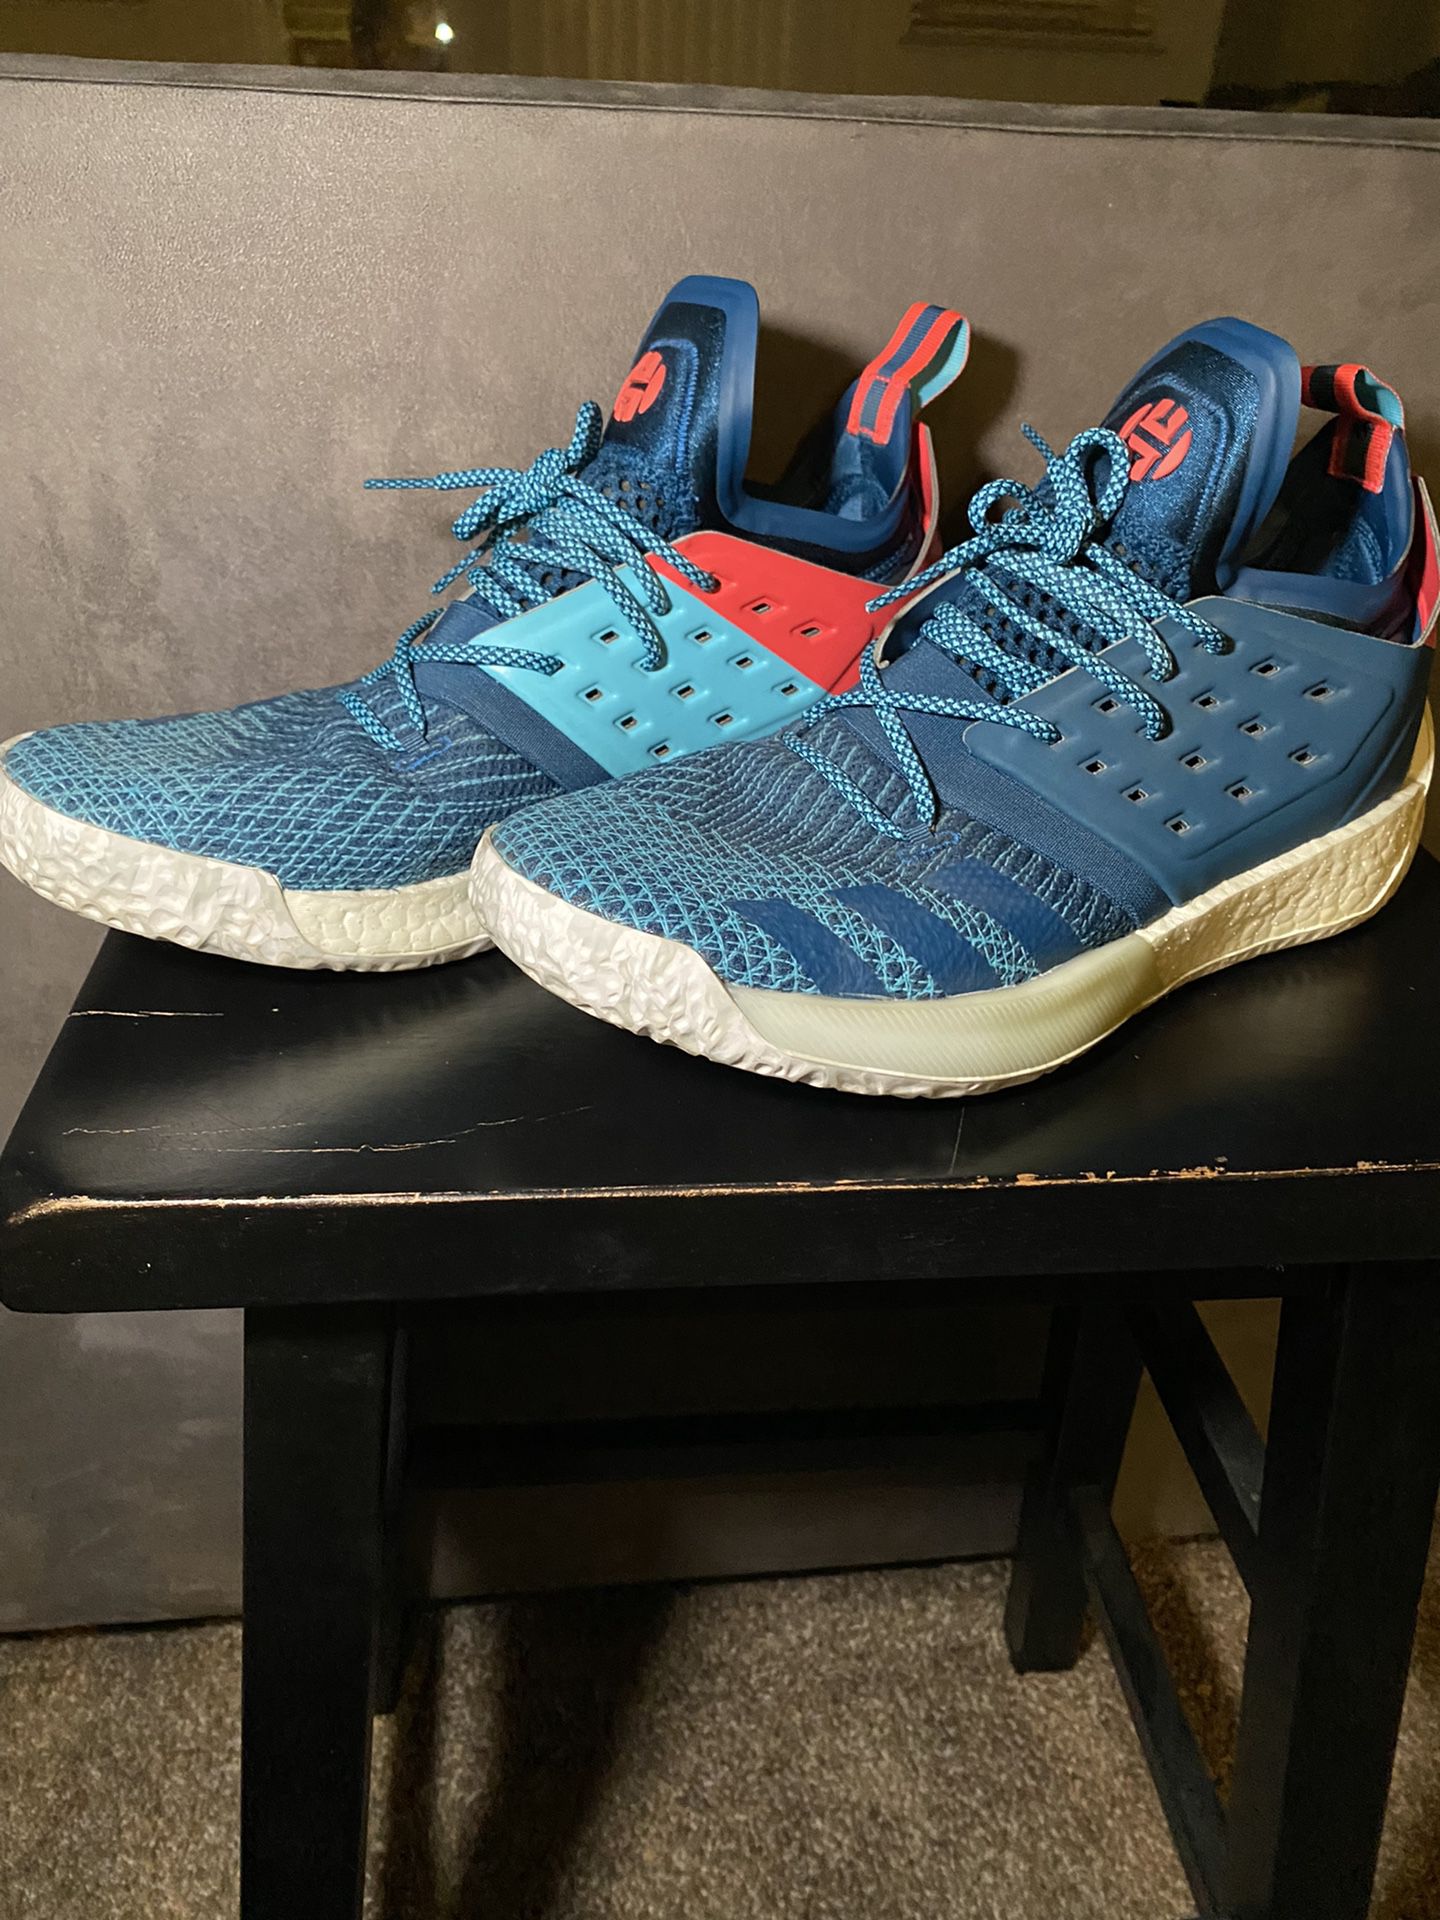 Adidas Vol.2 Blue Night for Sale in Manteca, CA - OfferUp